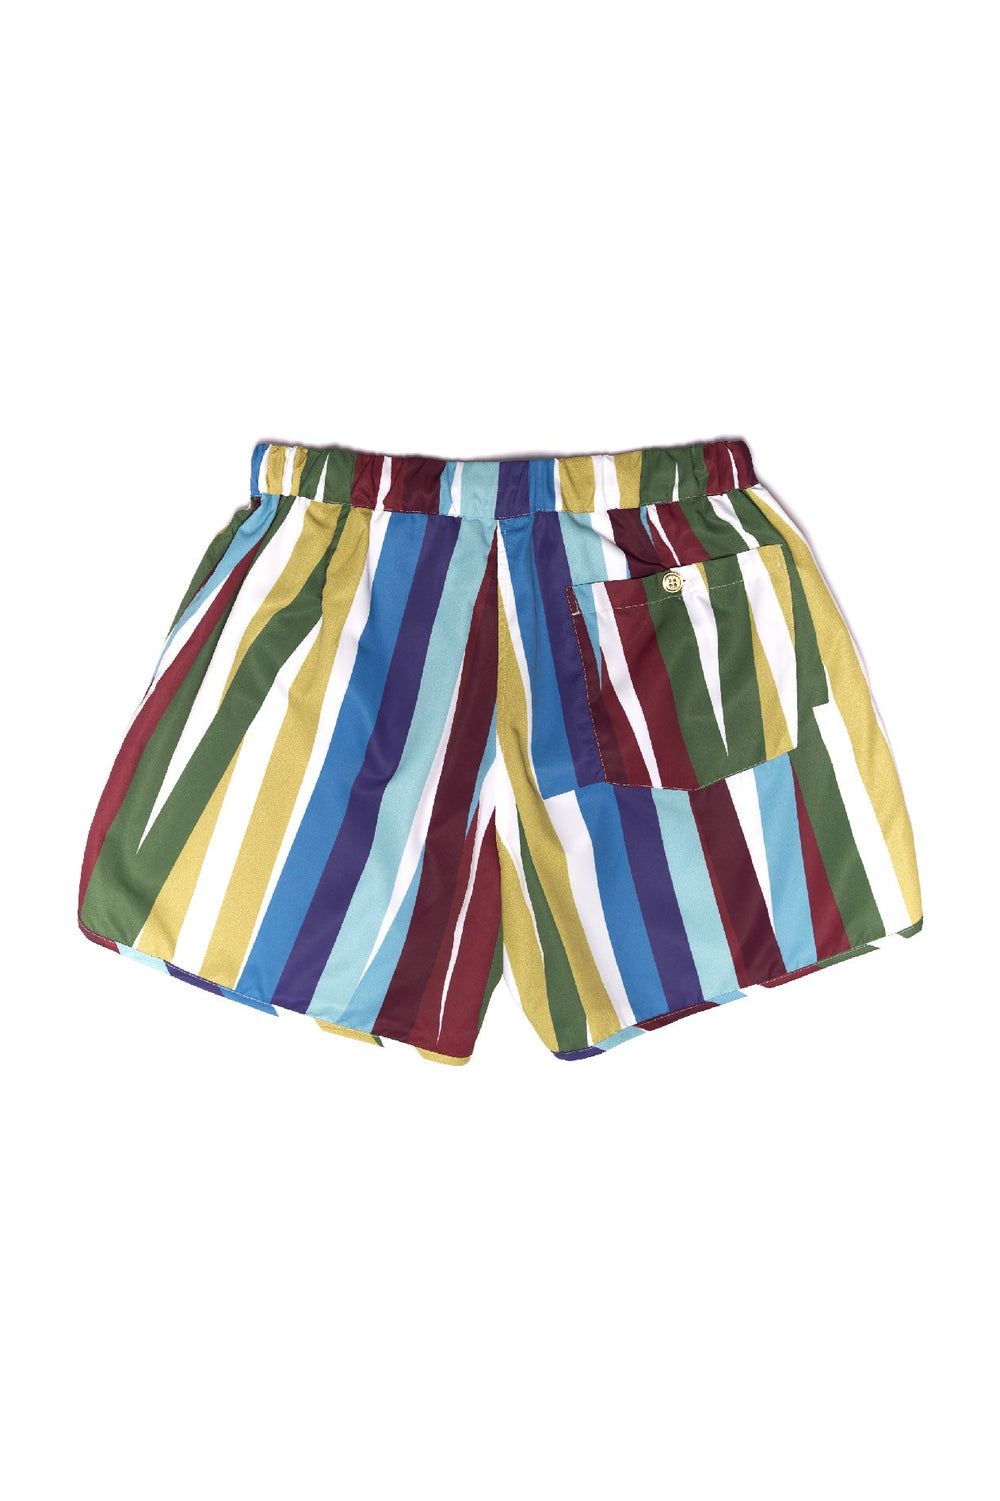 Colorful striped men's swim shorts with elastic waistband and back pocket